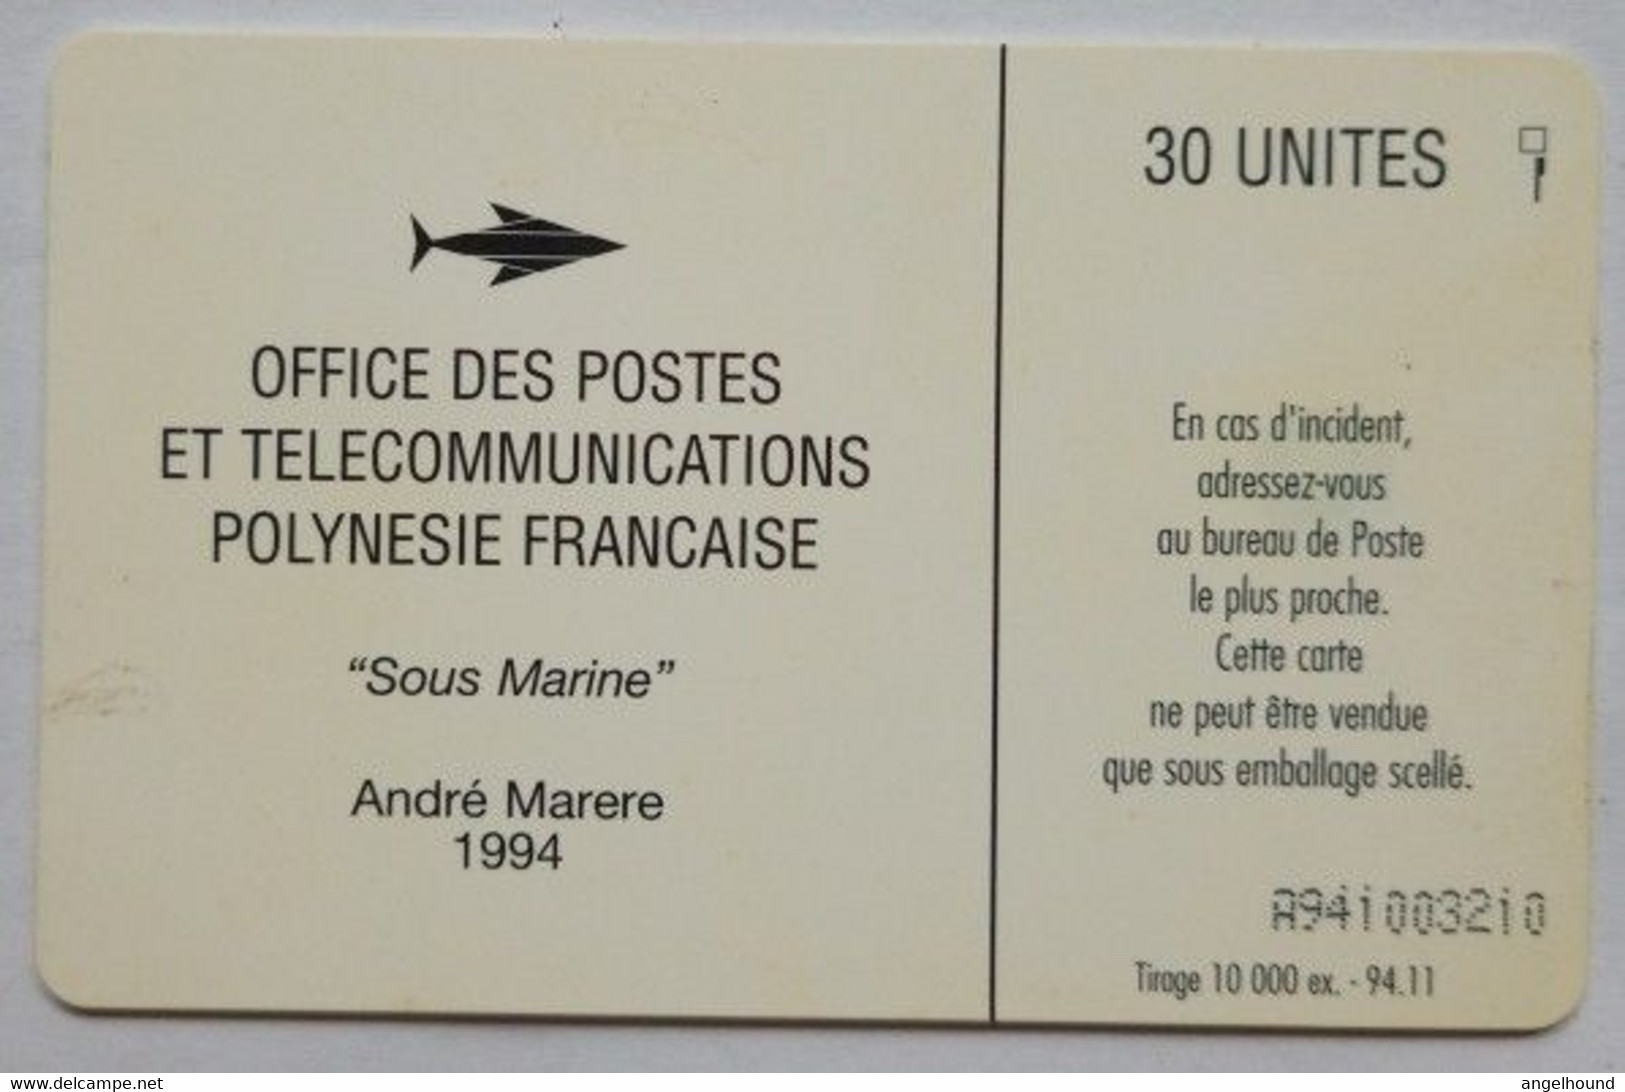 French Polynesia 30 Units " Sous Marine - Andre Marere 1994 " - Polynésie Française